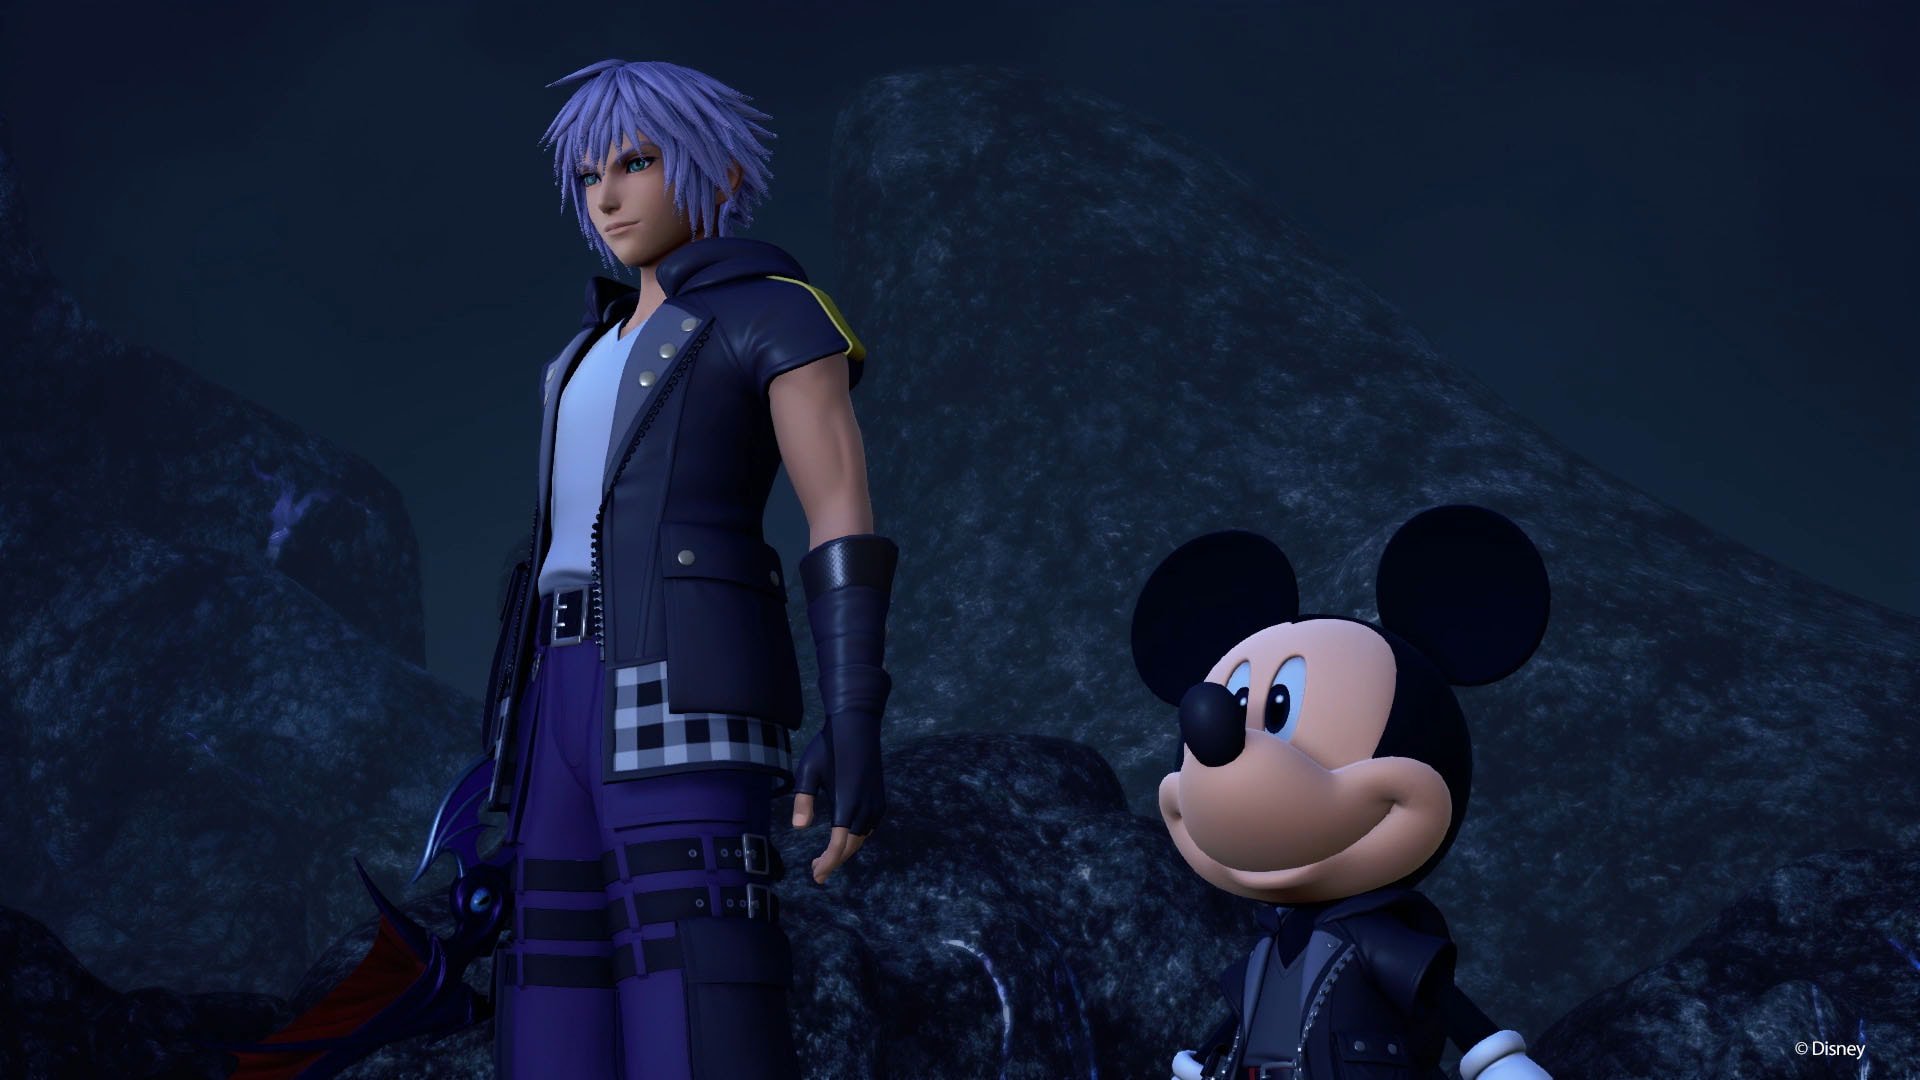 Mickey Mouse in Kingdom Hearts 3 standing with Sora against a night sky.